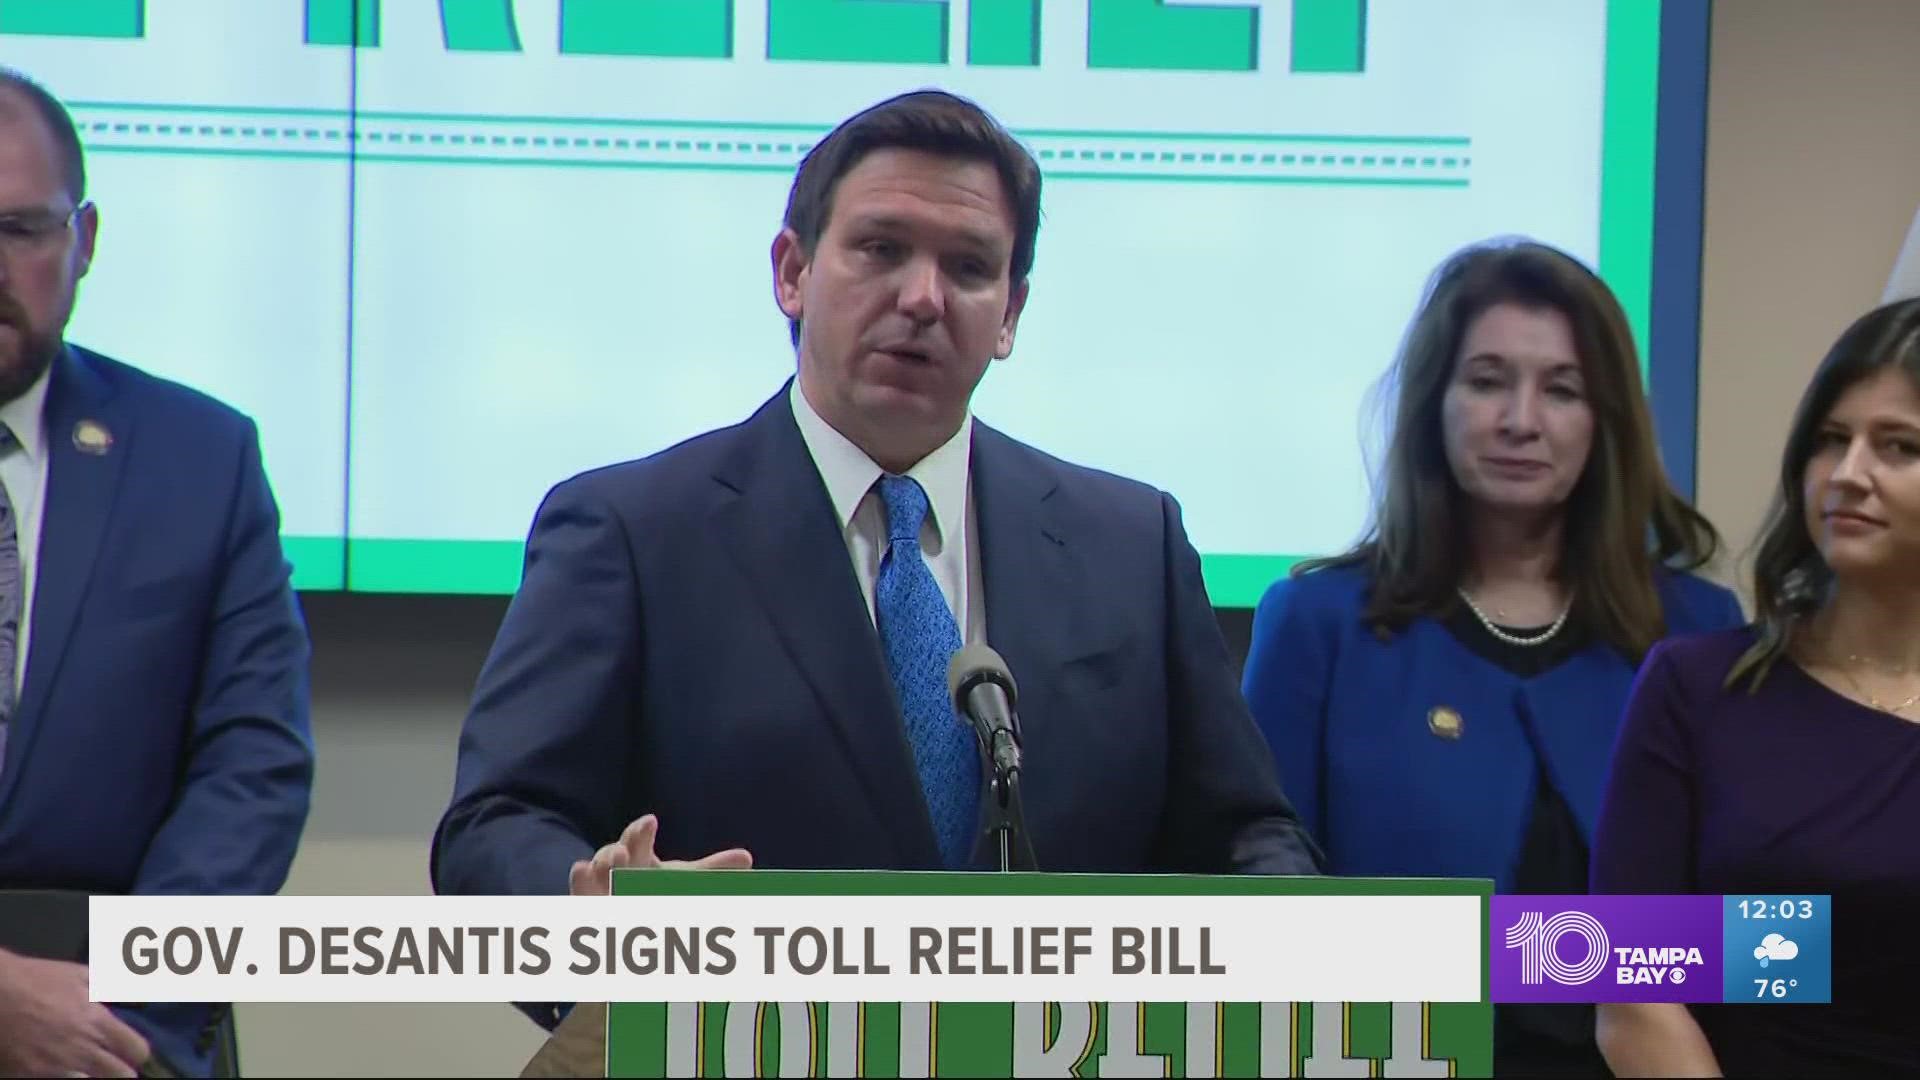 The bill will credit commuters 50% of their tolls if their transponder is used at least 35 times during a month.